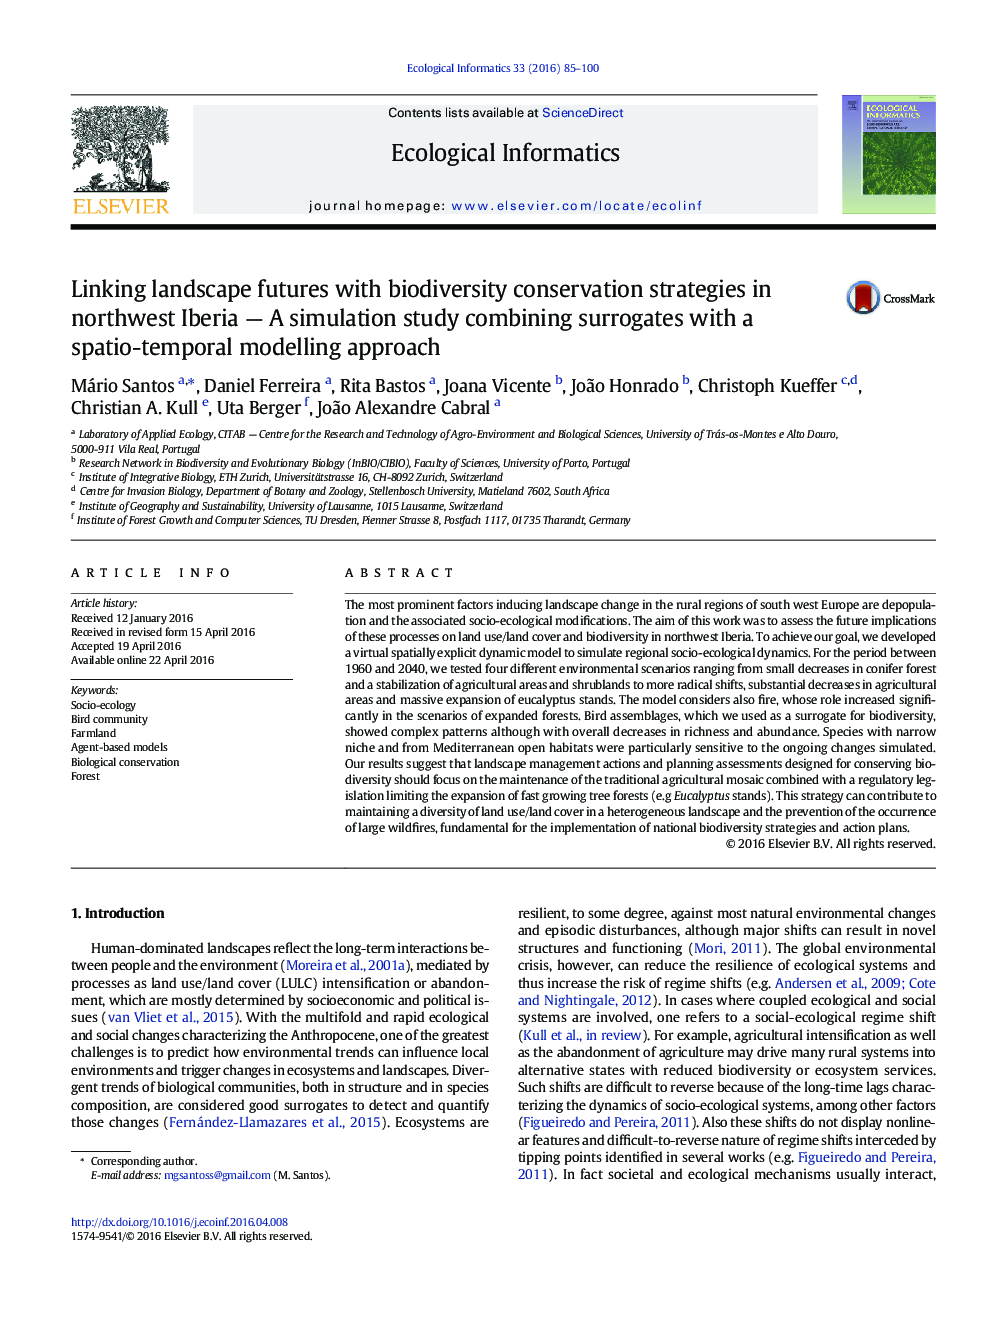 Linking landscape futures with biodiversity conservation strategies in northwest Iberia — A simulation study combining surrogates with a spatio-temporal modelling approach